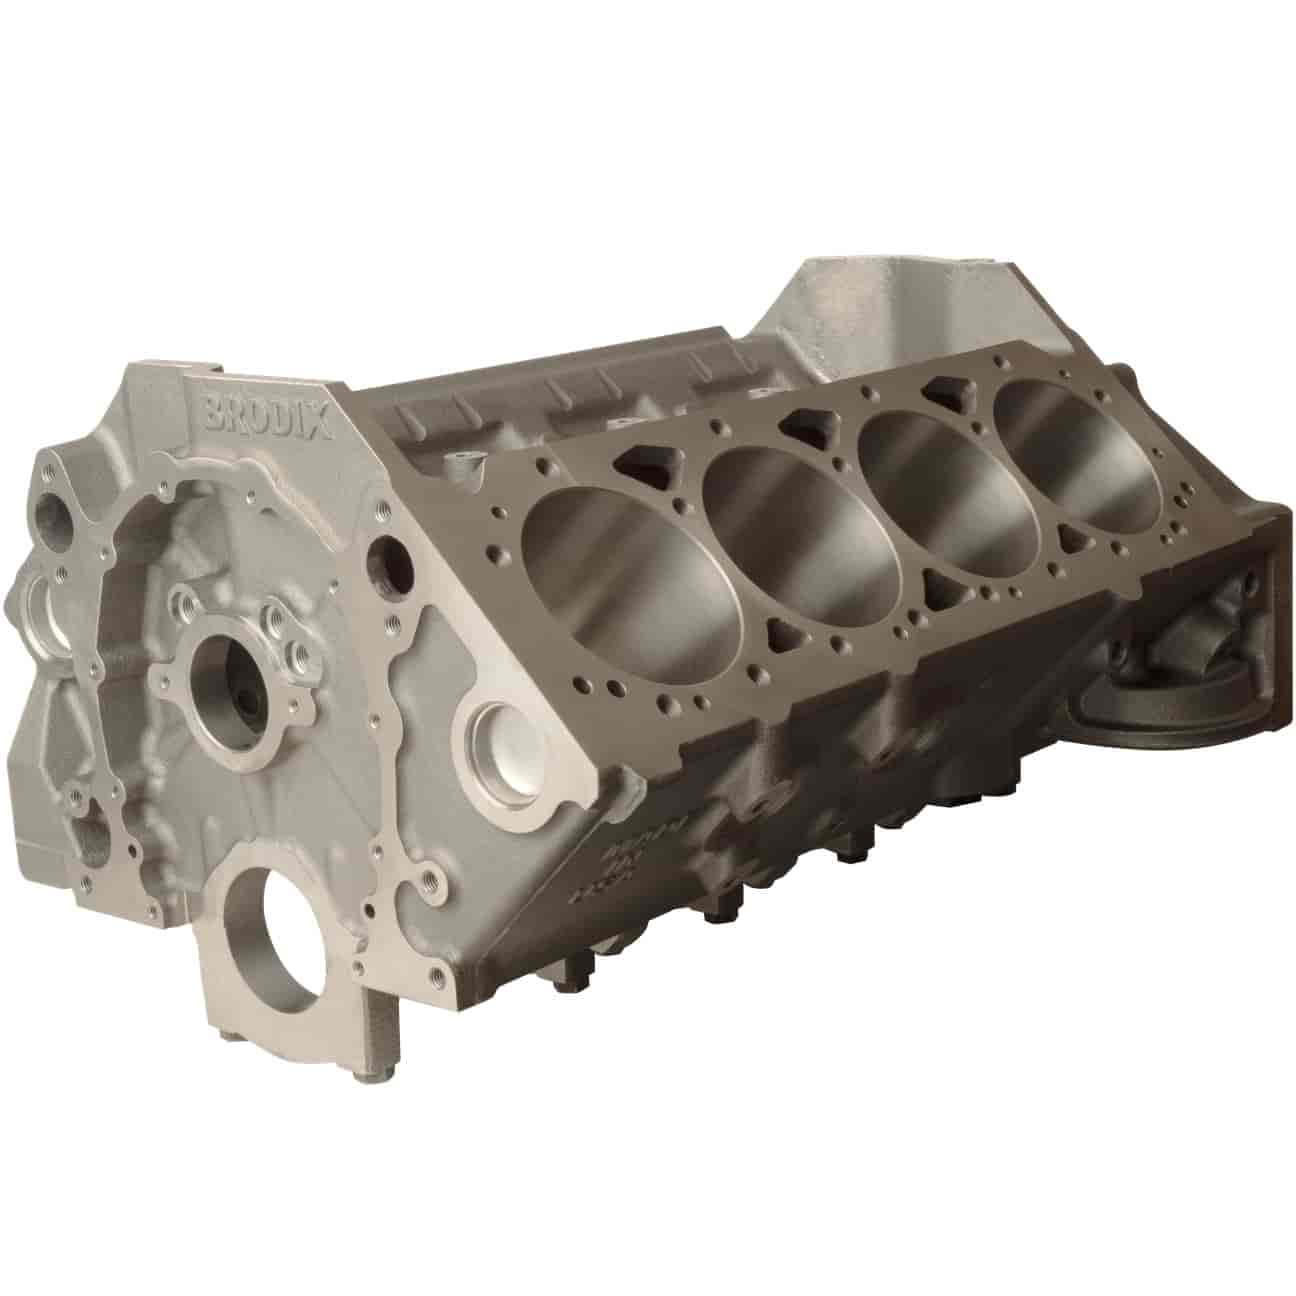 Cast Iron Small Block Chevy Bare Engine Block [4.125 in. Bore, 350 Mains]